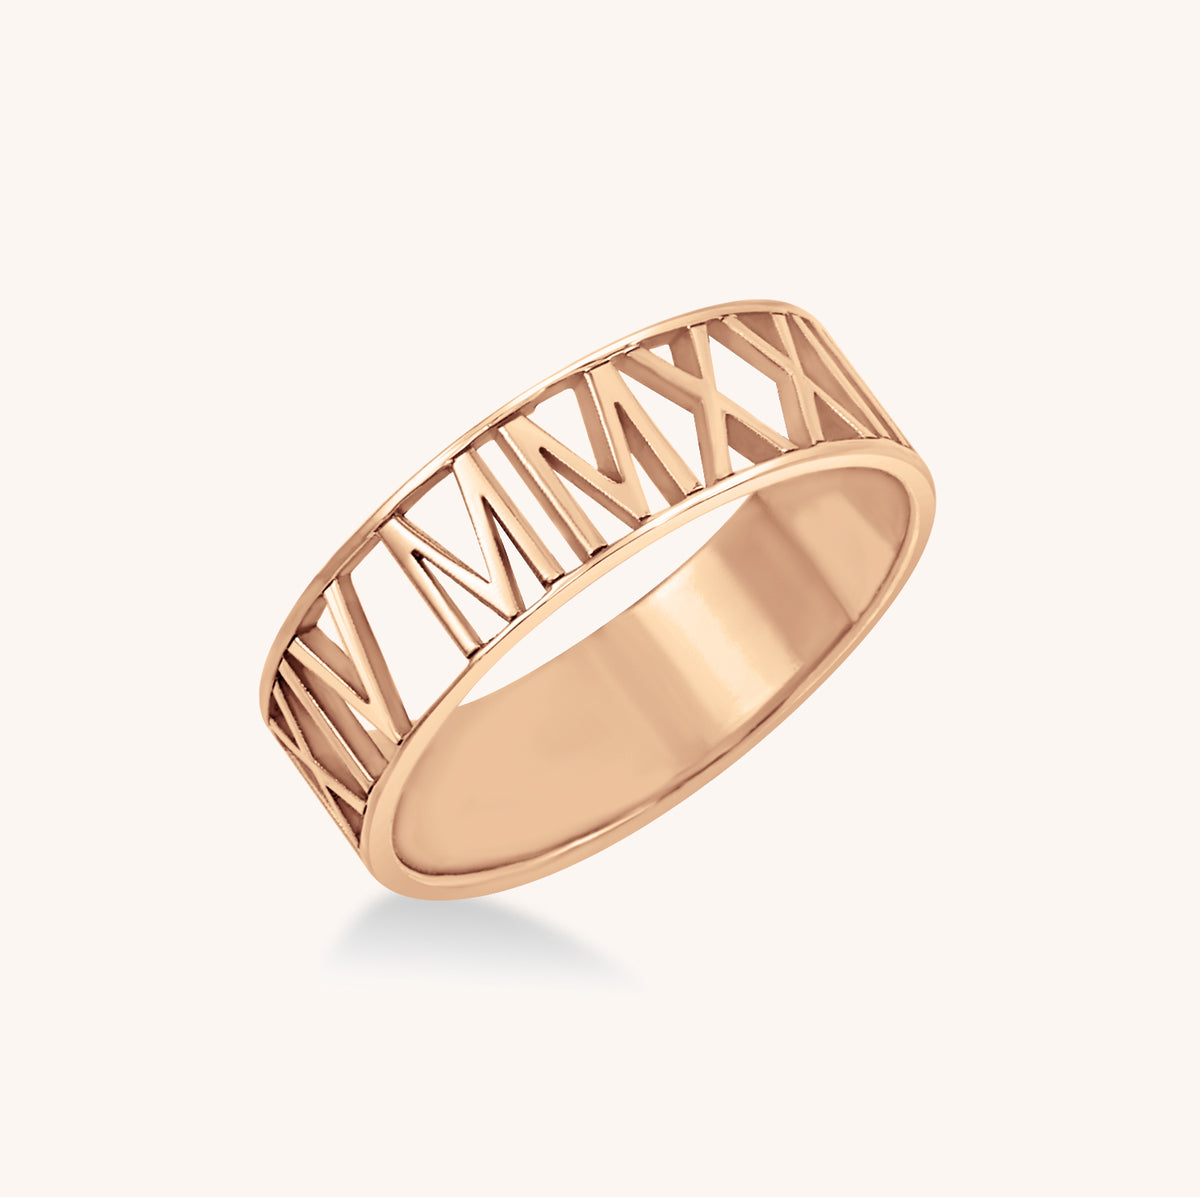 Roman Numeral Year Ring